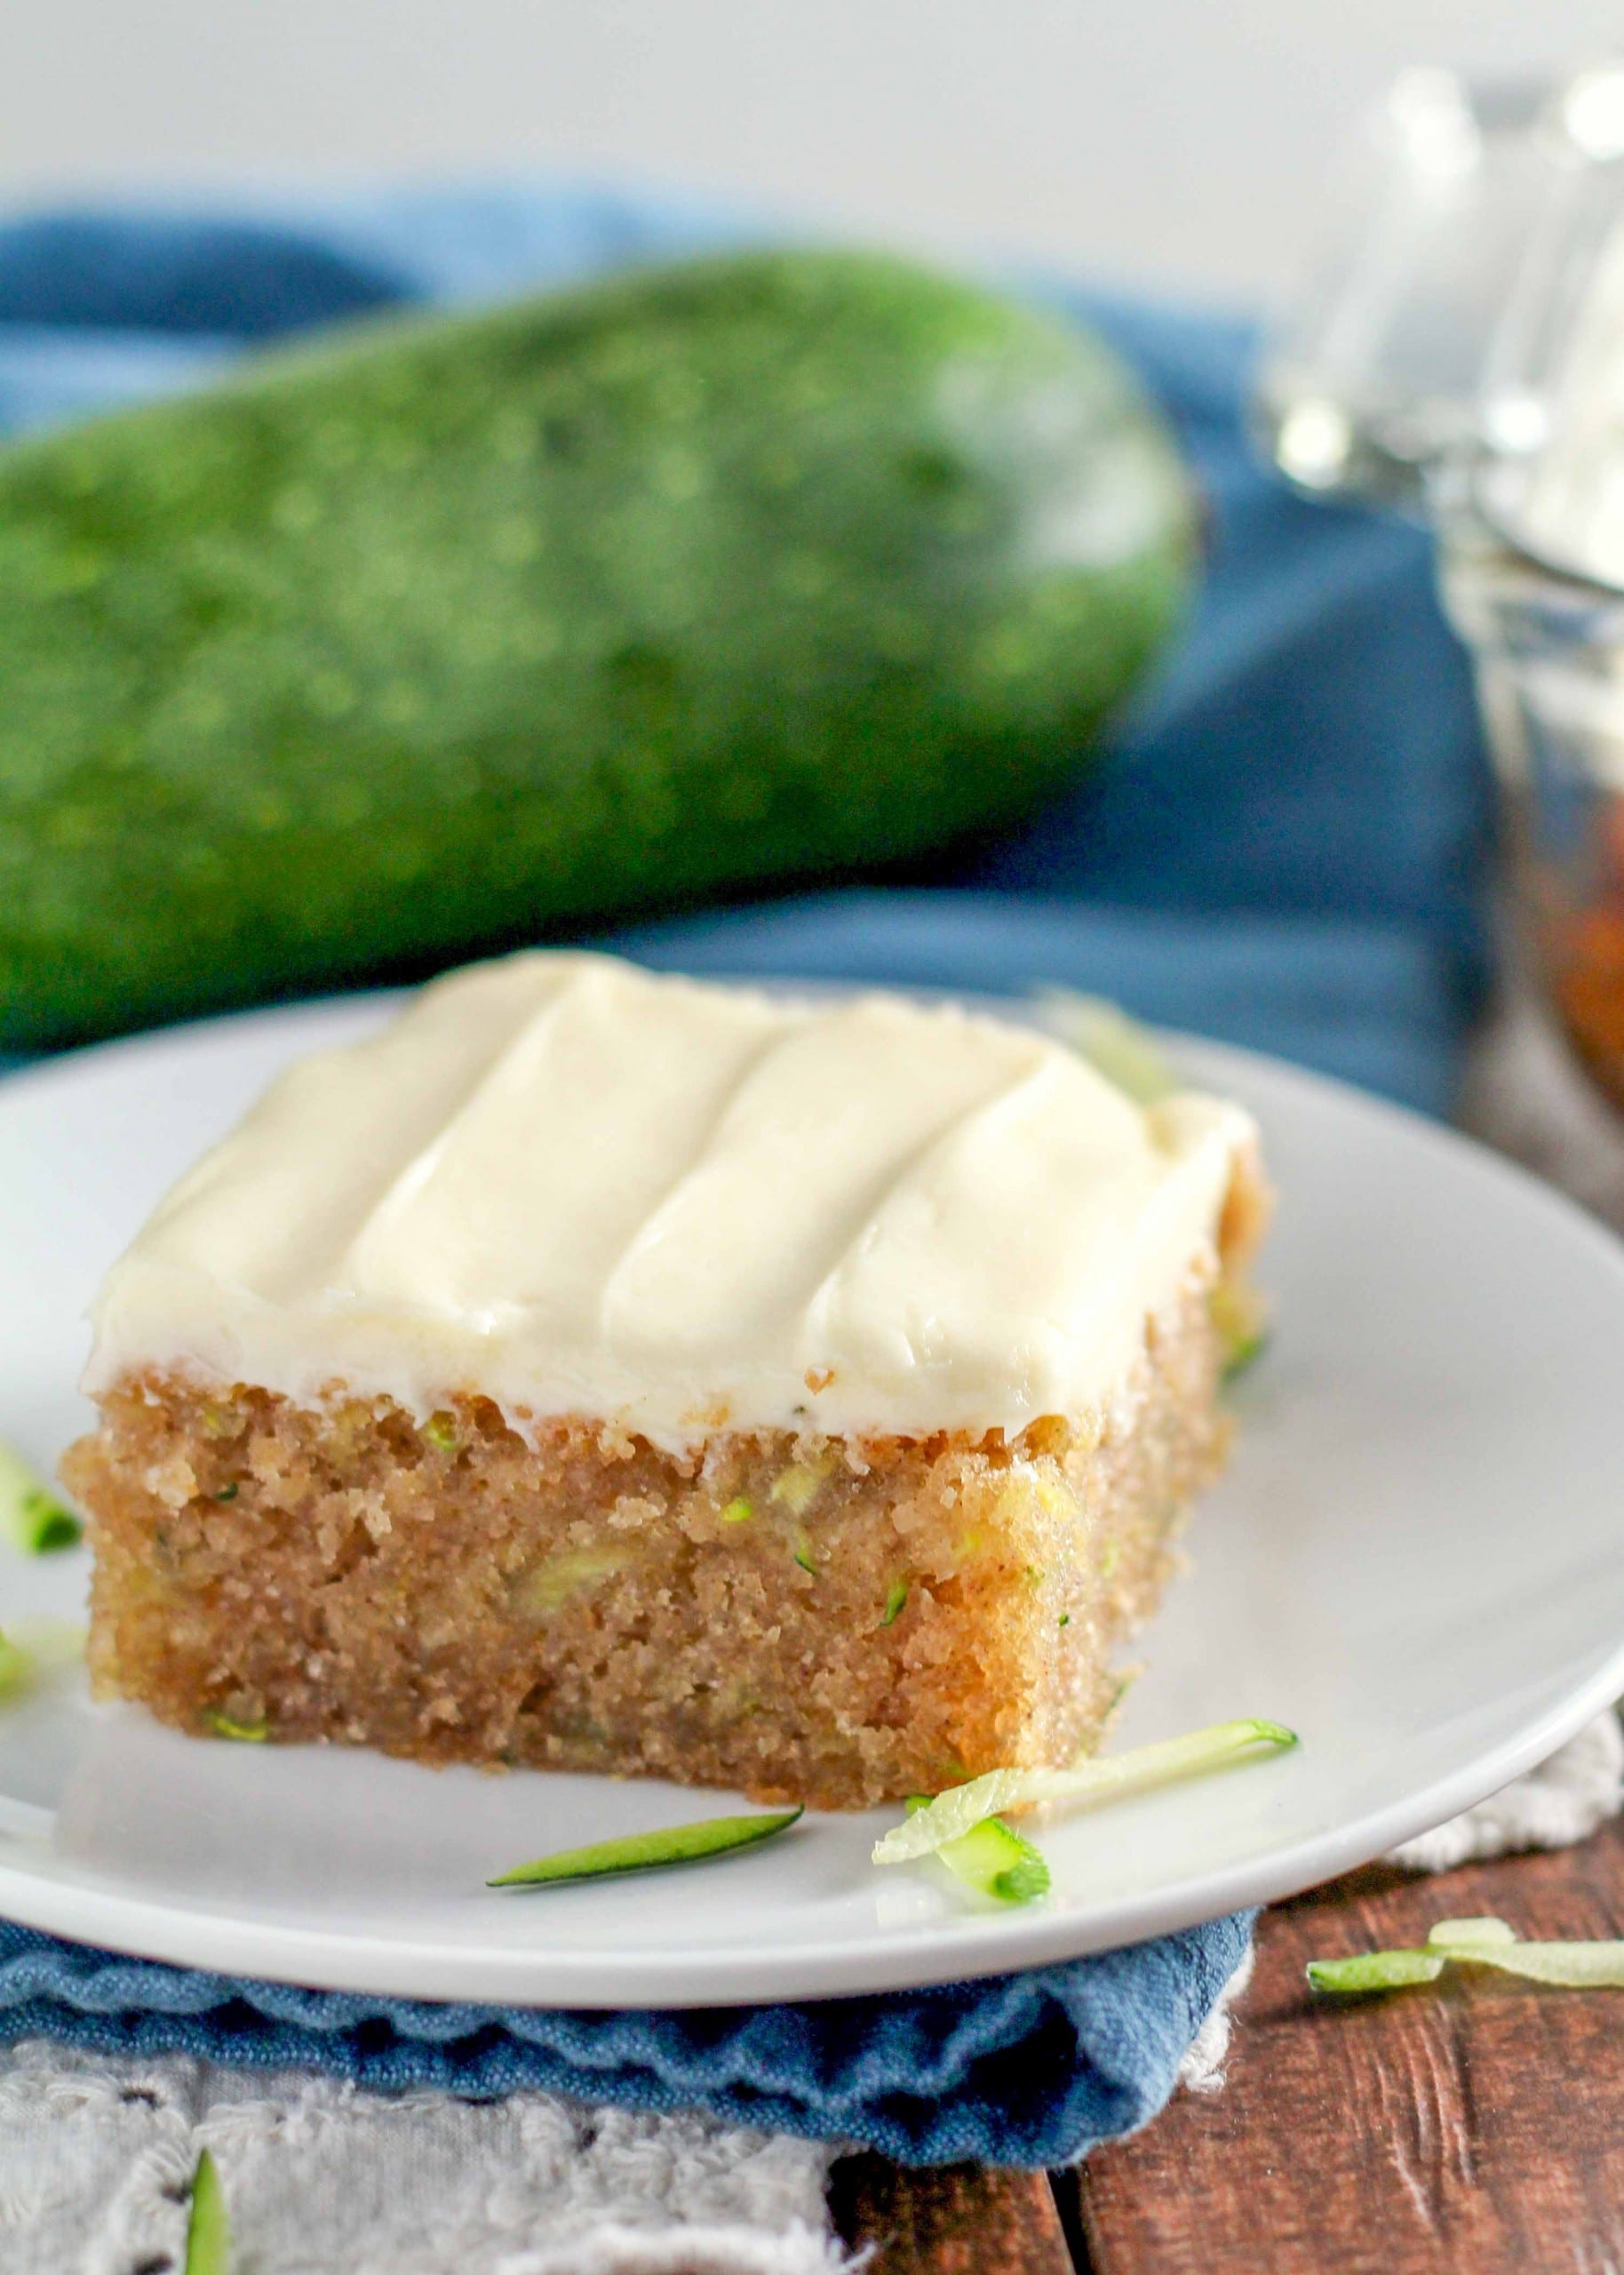 Spiced Zucchini Cake with Cream Cheese Frosting - 31 Daily